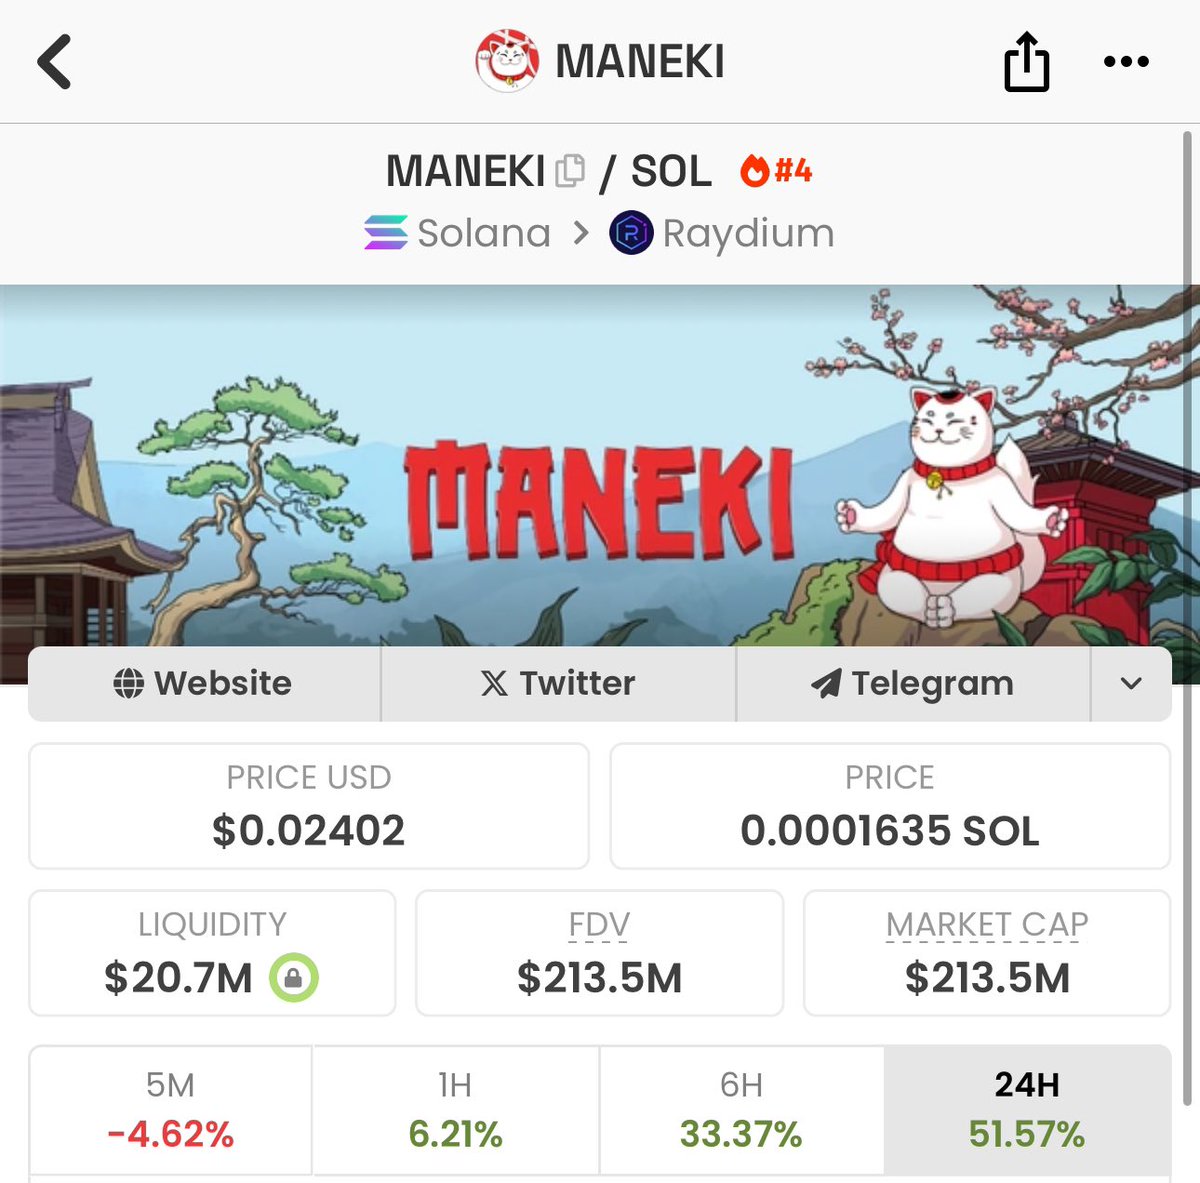 $2.5M to $213M close to X100 for my Twitter and telegram chads on $MANEKI good work @UnrevealedXYZ 🔥send it to $500M.